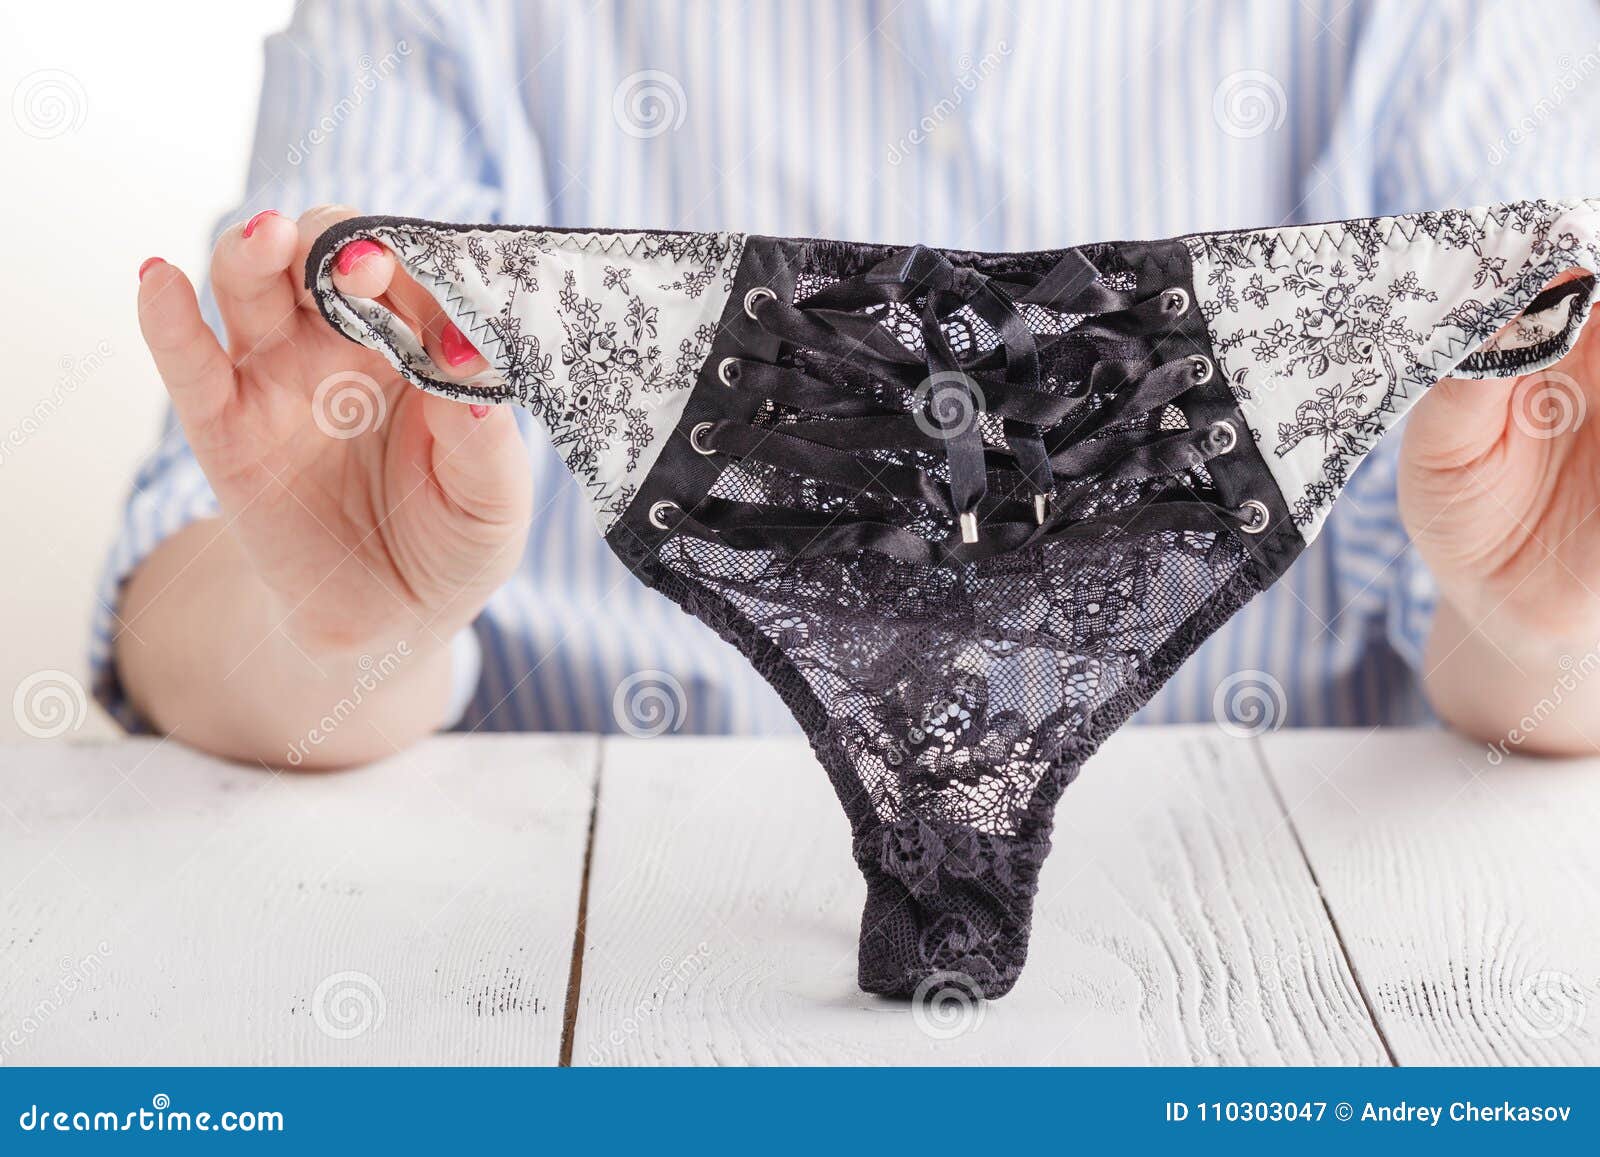 Hand of Young Woman Holding Lace Panties Stock Image - Image of